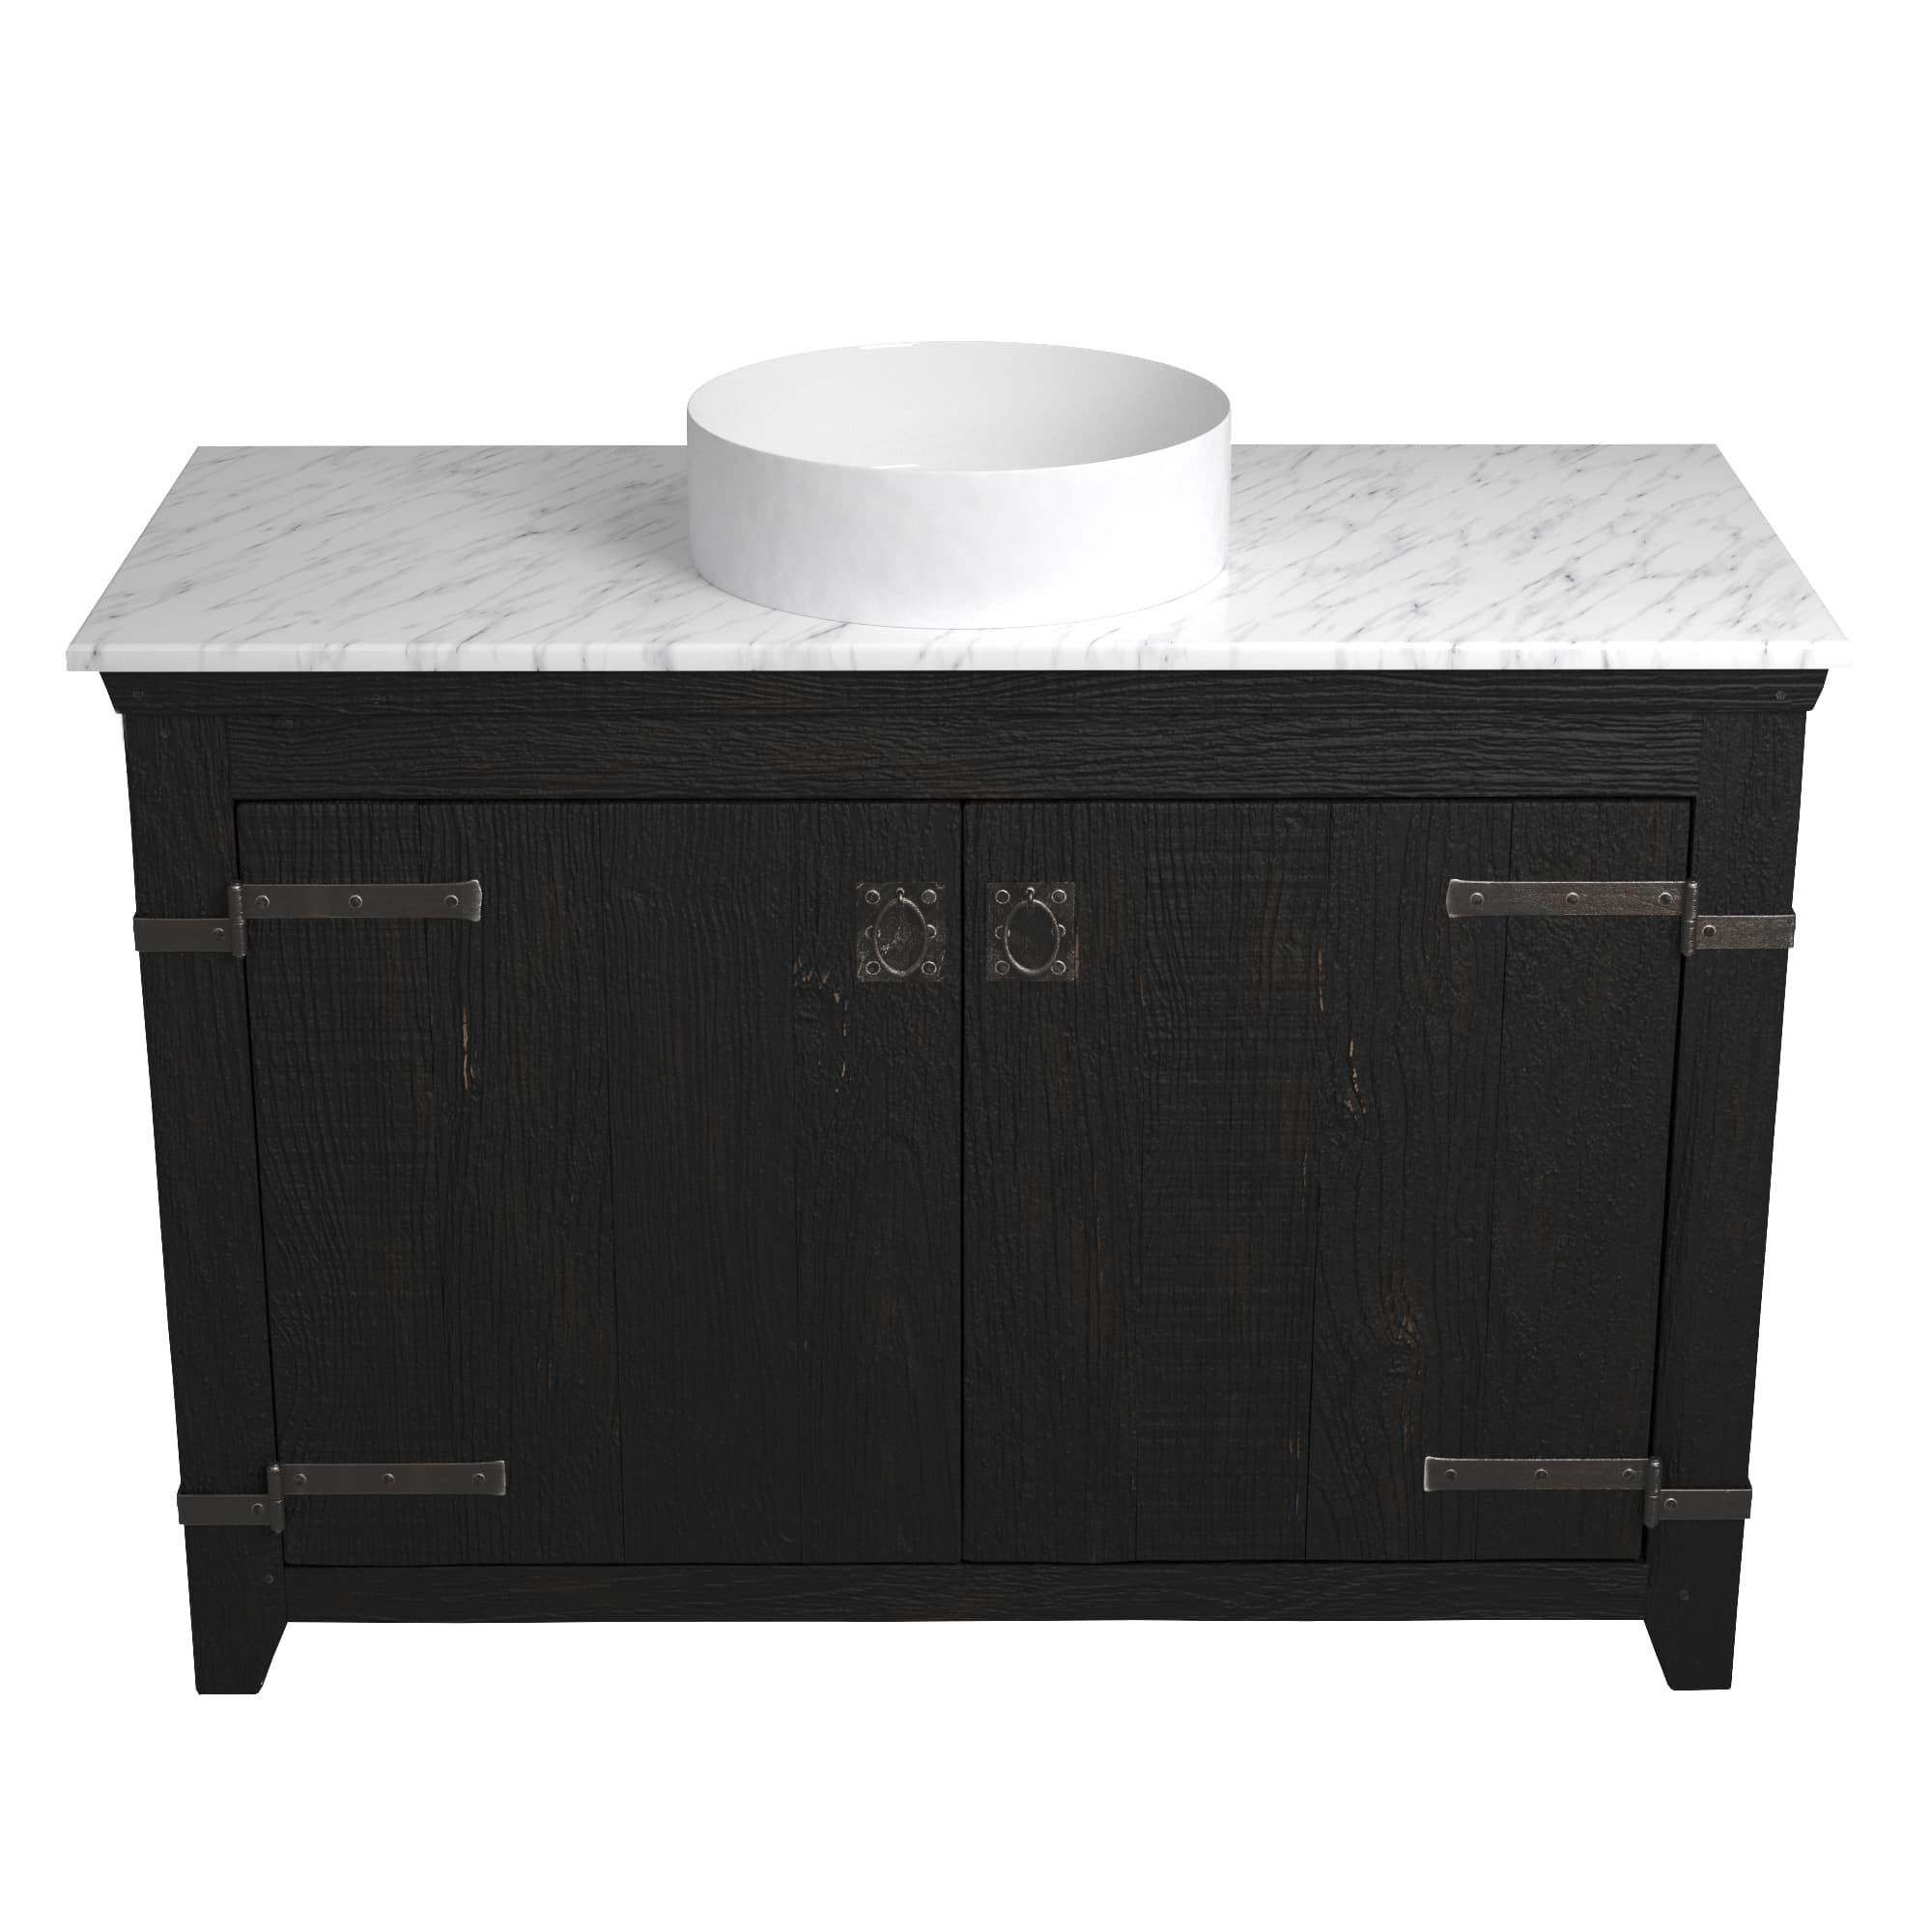 Native Trails 48" Americana Vanity in Anvil with Carrara Marble Top and Positano in Bianco, Single Faucet Hole, BND48-VB-CT-MG-053